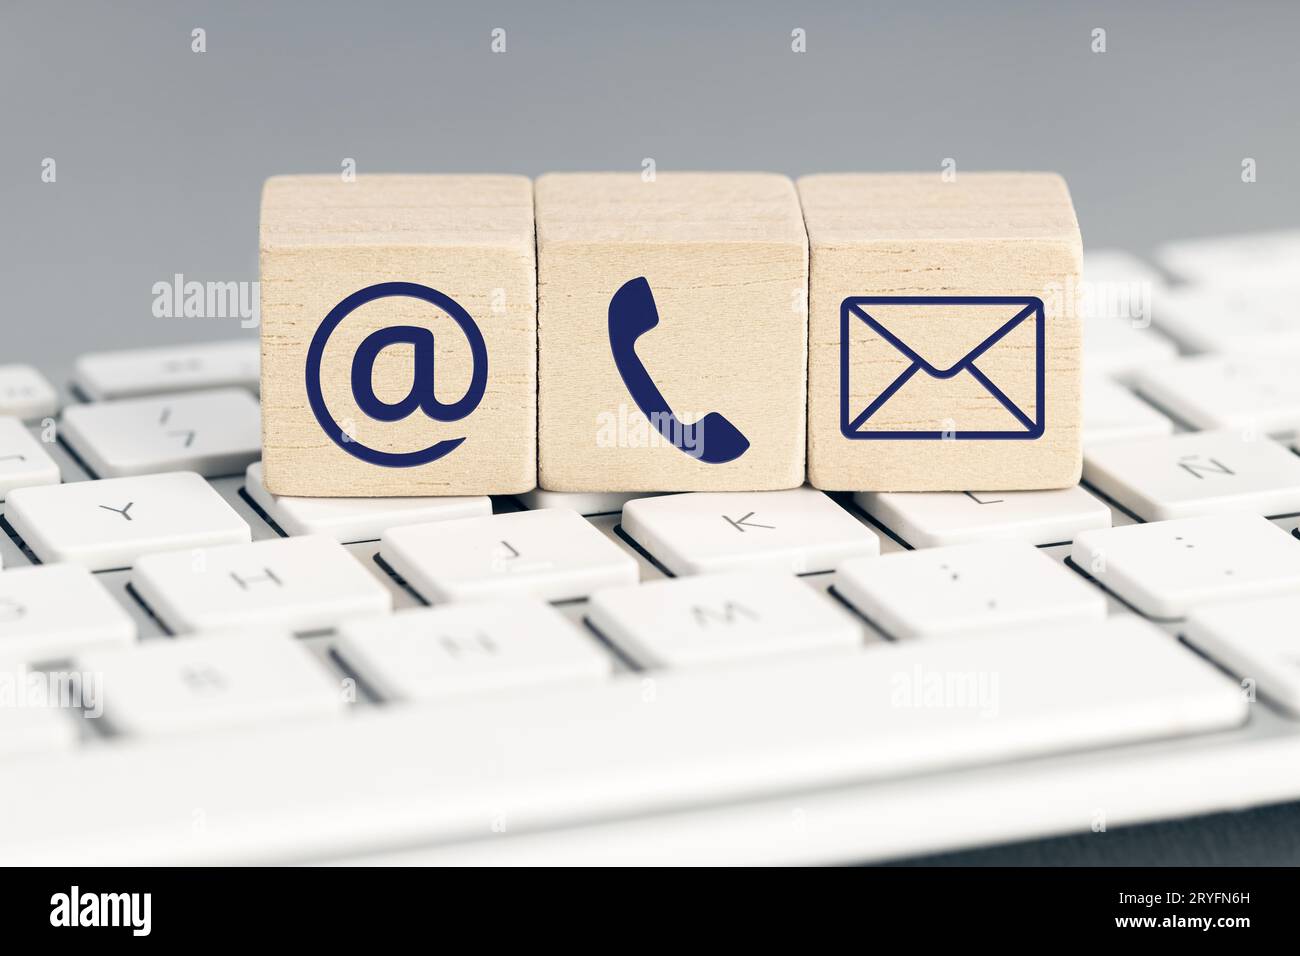 Contact us icons on wooden blocks on computer keyboard Stock Photo